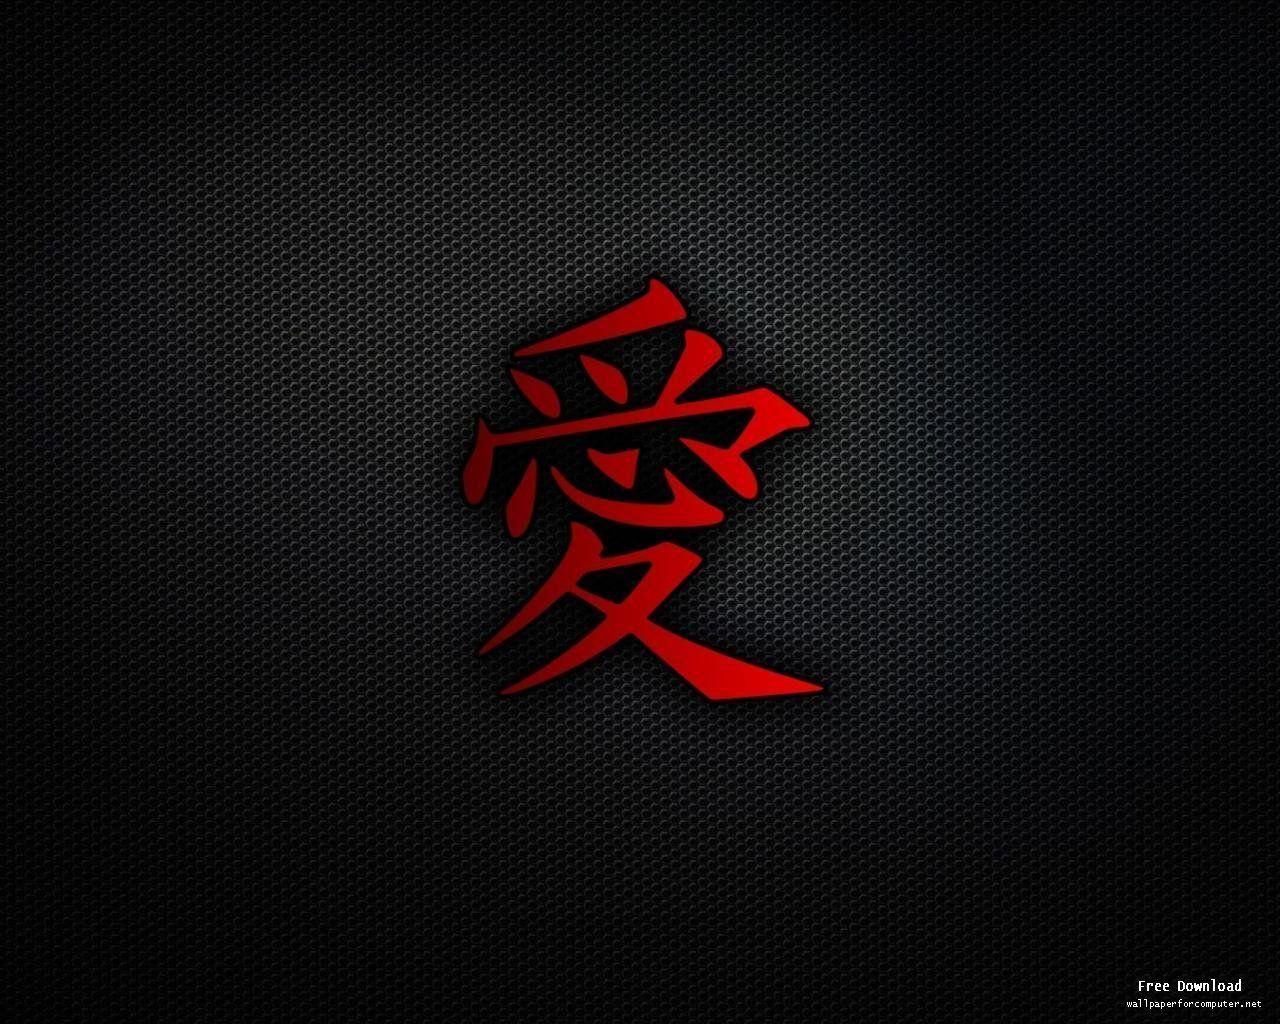 Cool Chinese Letter Wallpaper Free Cool Chinese Letter